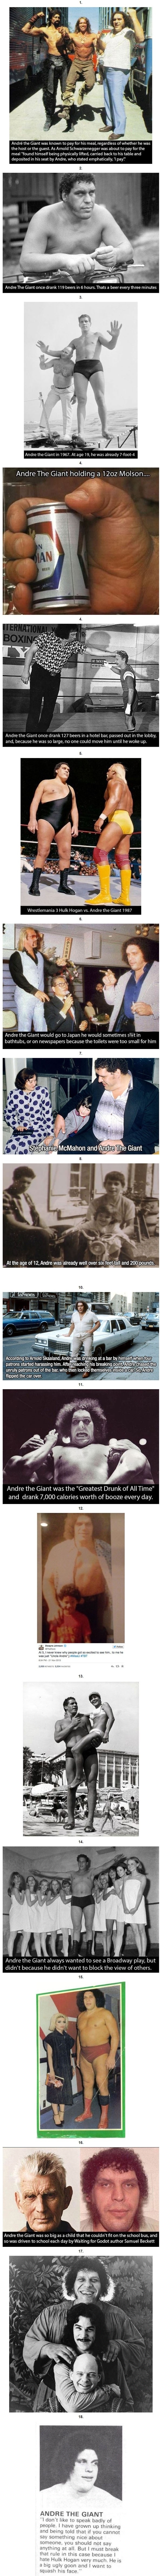 Facts about Andre the Giant